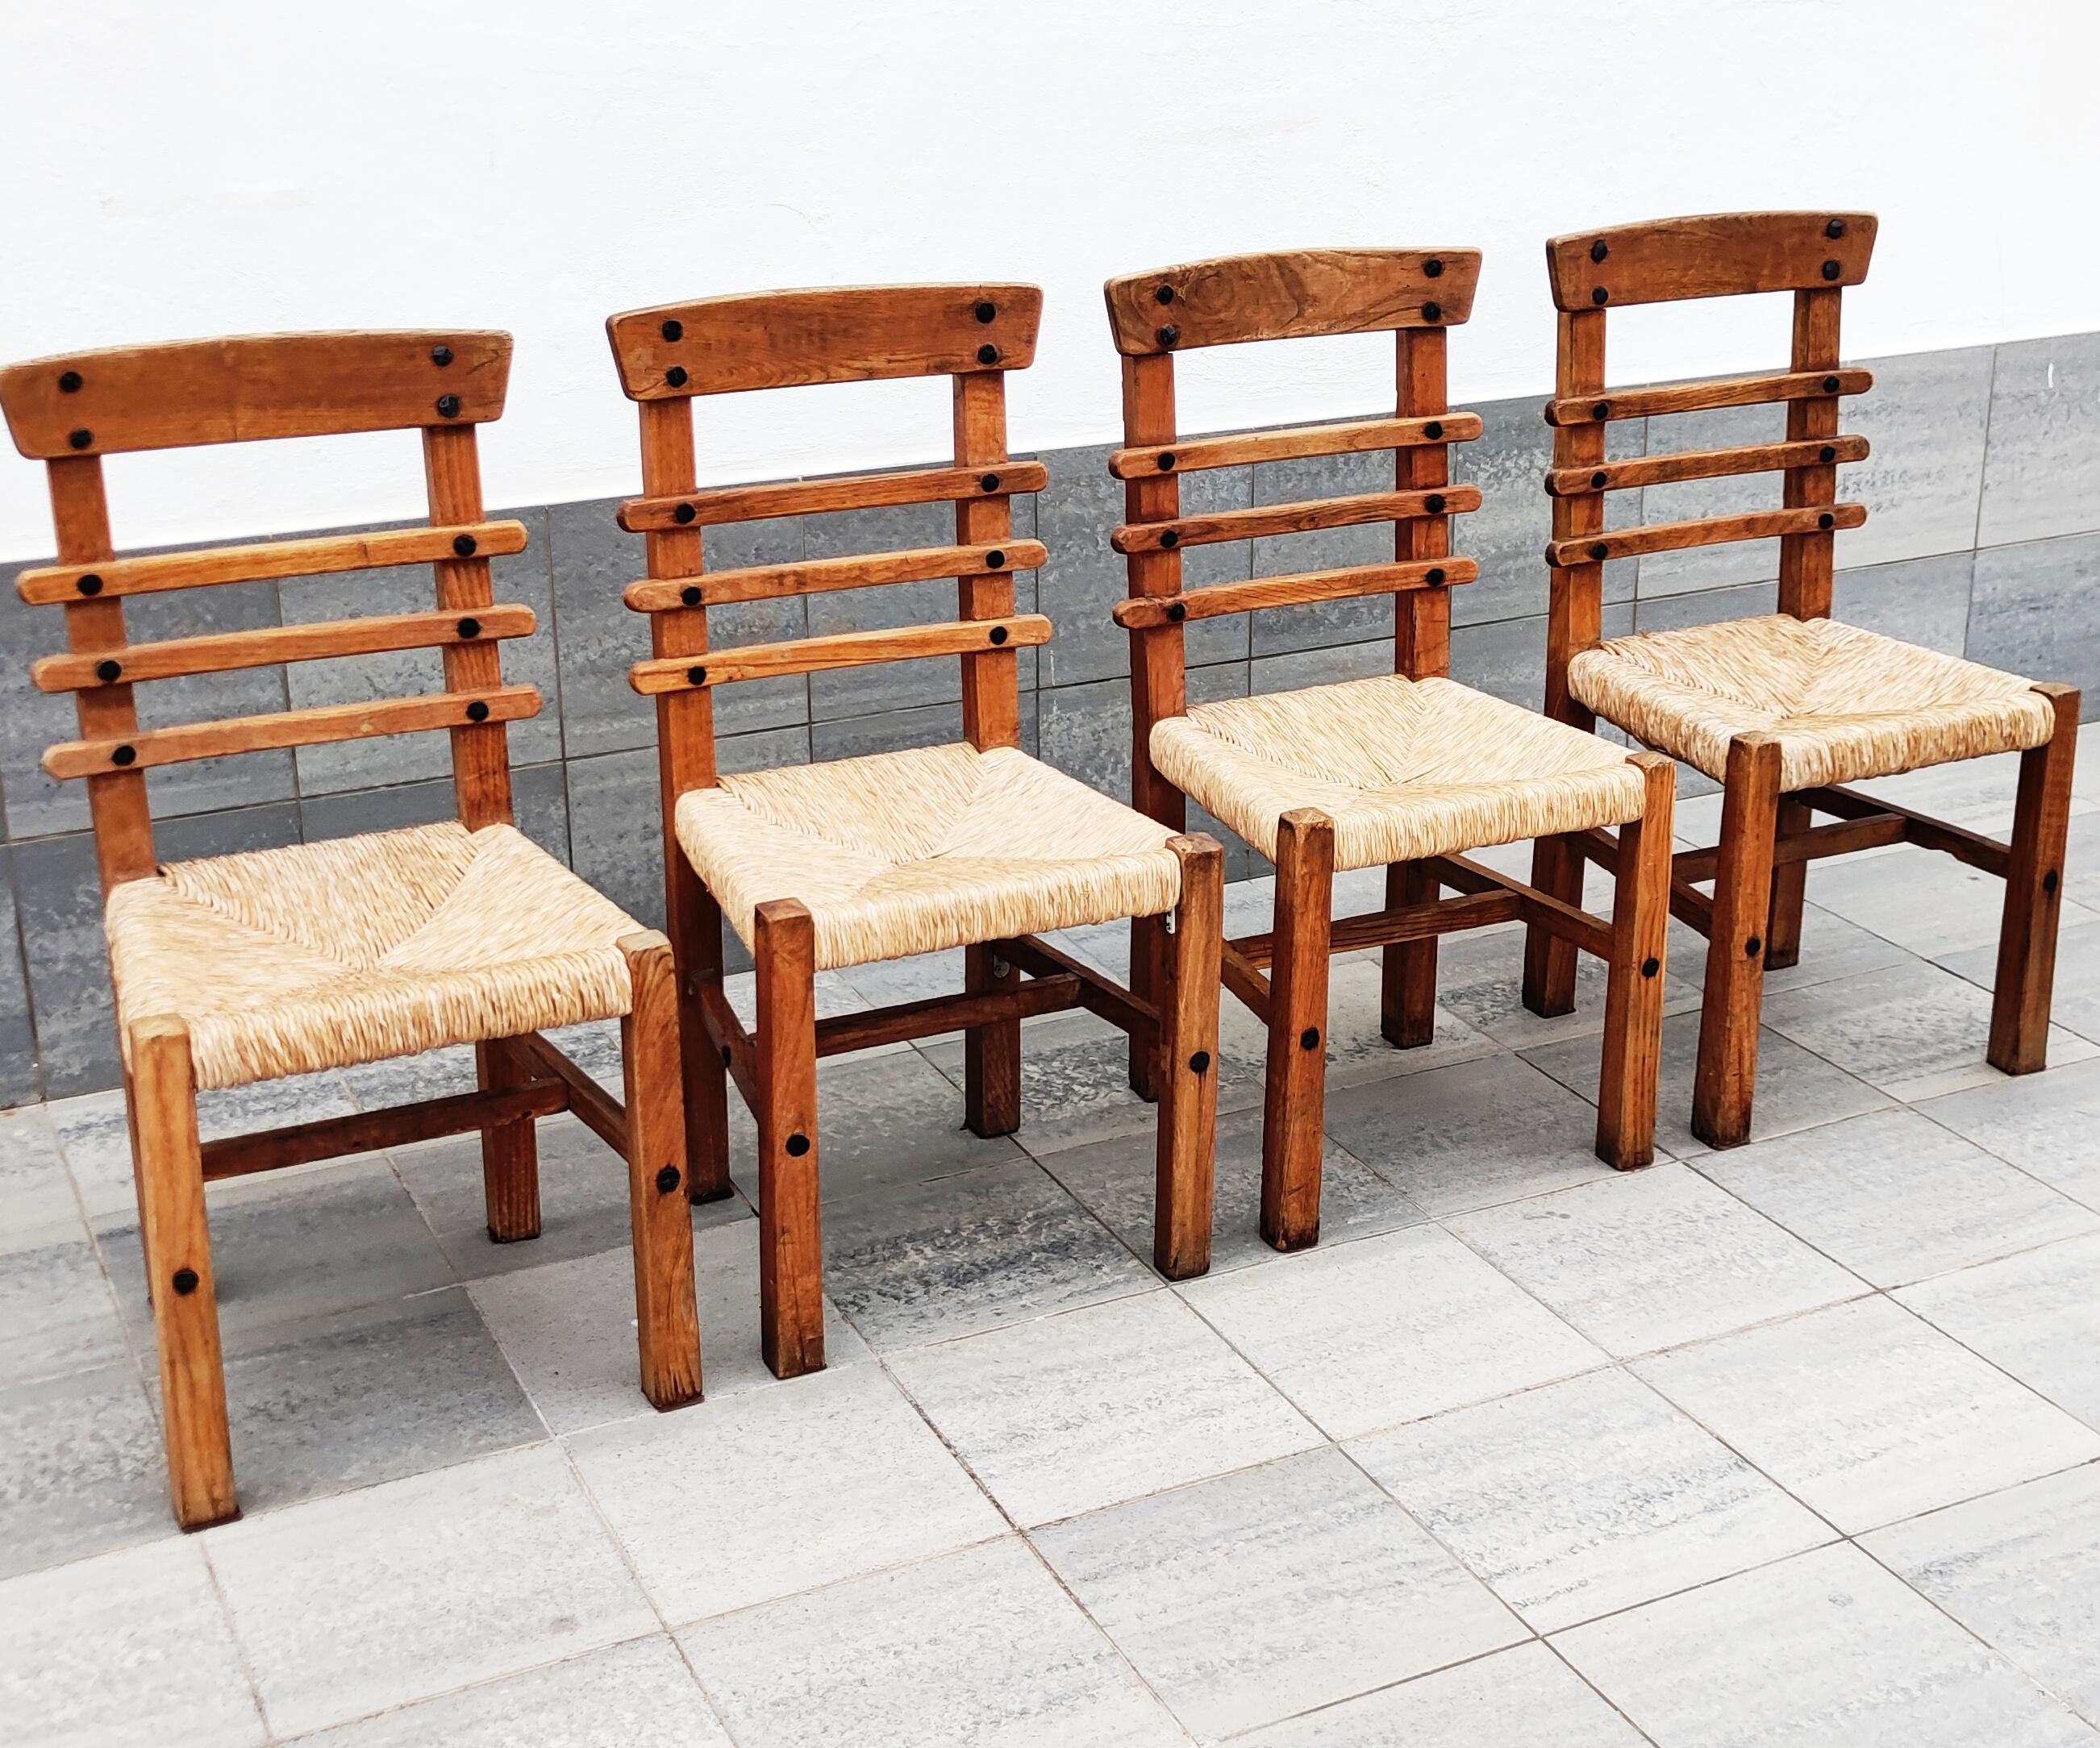 Beautiful and rare set of 4 brutalist oak and straw dining chairs manufactured in Spain in 1950s.
In very good vintage condition.